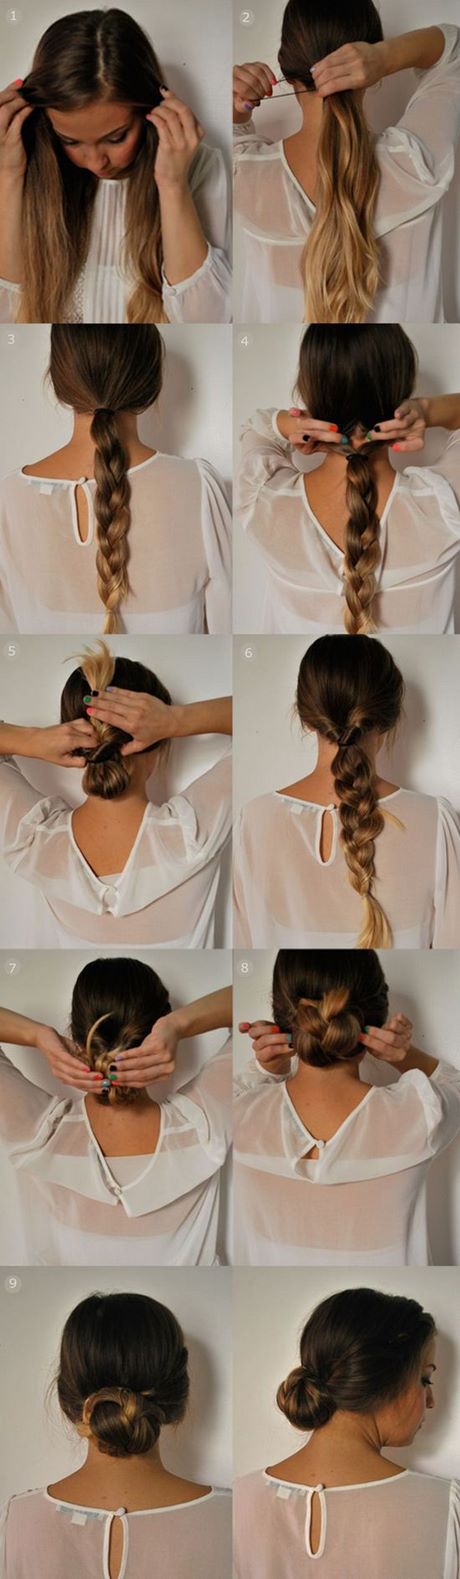 Quick and easy updo hairstyles quick-and-easy-updo-hairstyles-12_7